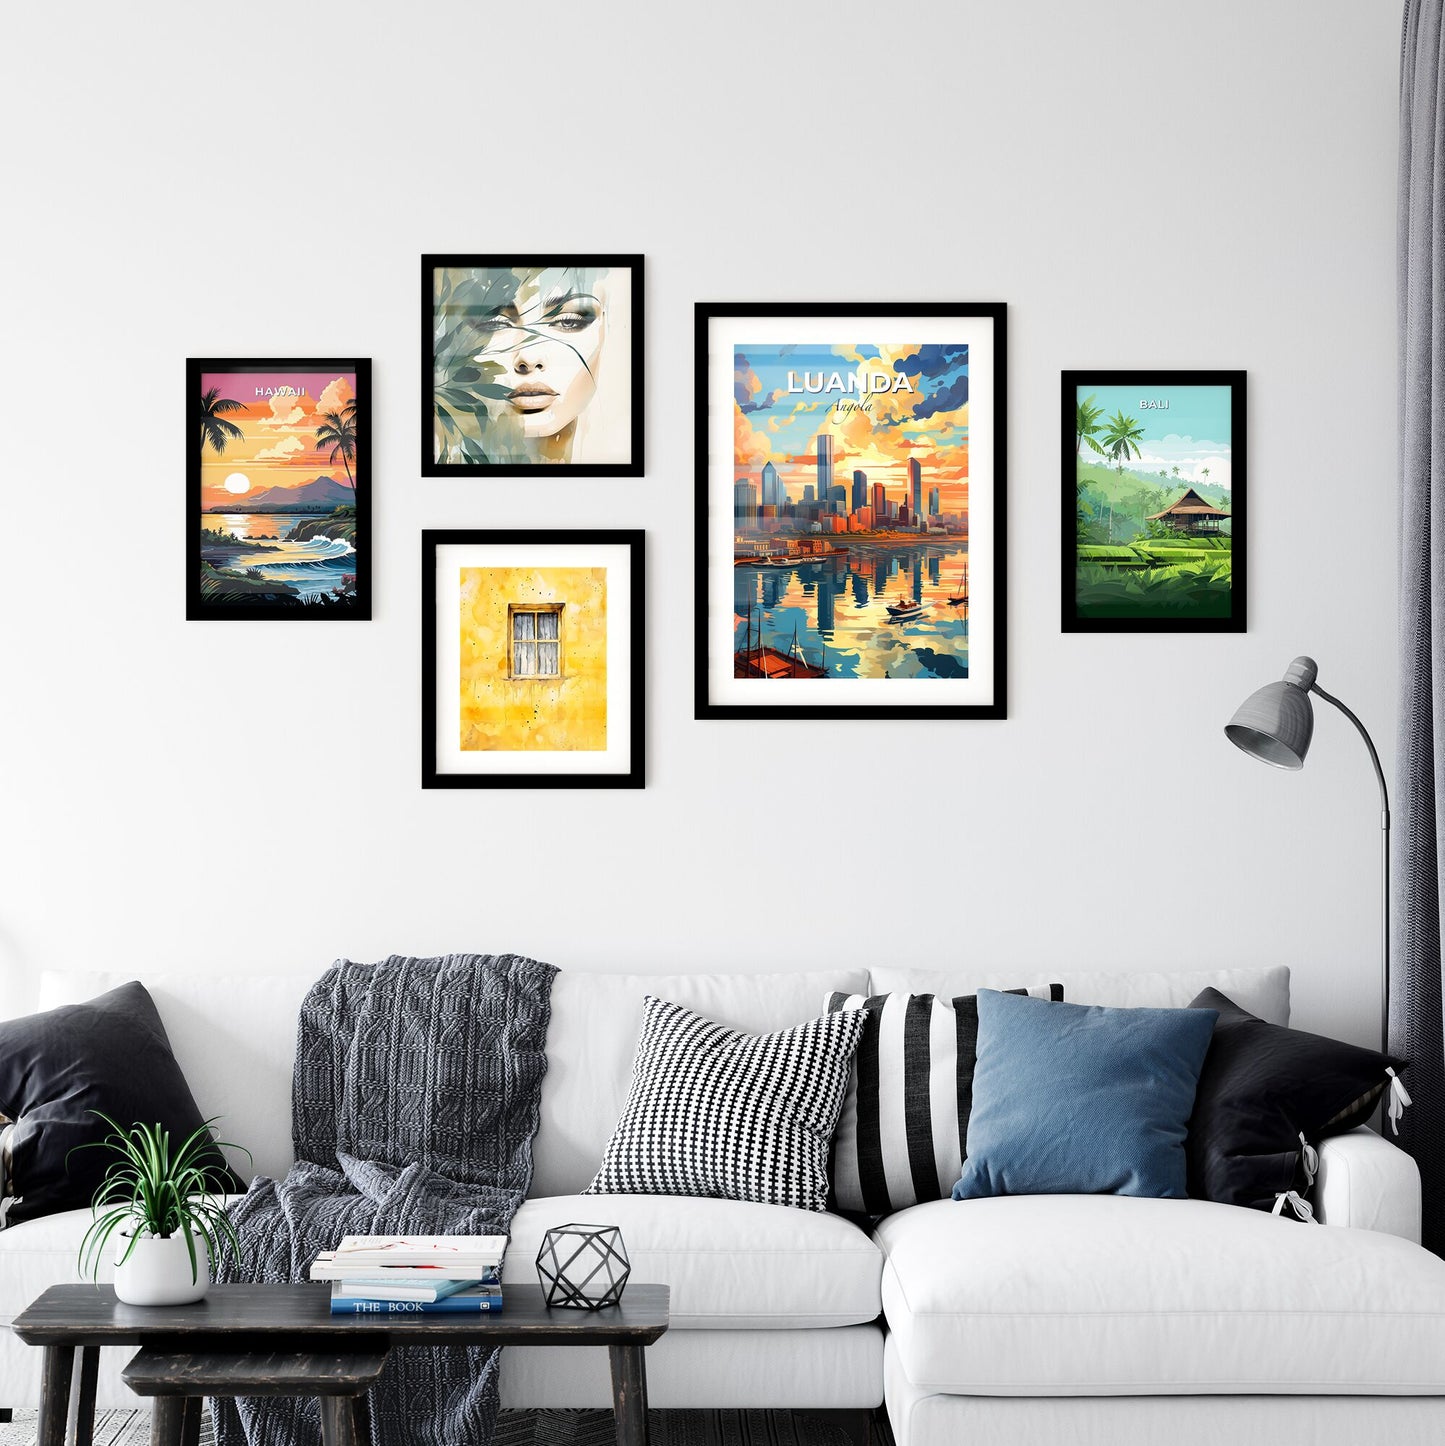 Vibrant Luanda Angola City Skyline Art Painting with Boats on Water Default Title